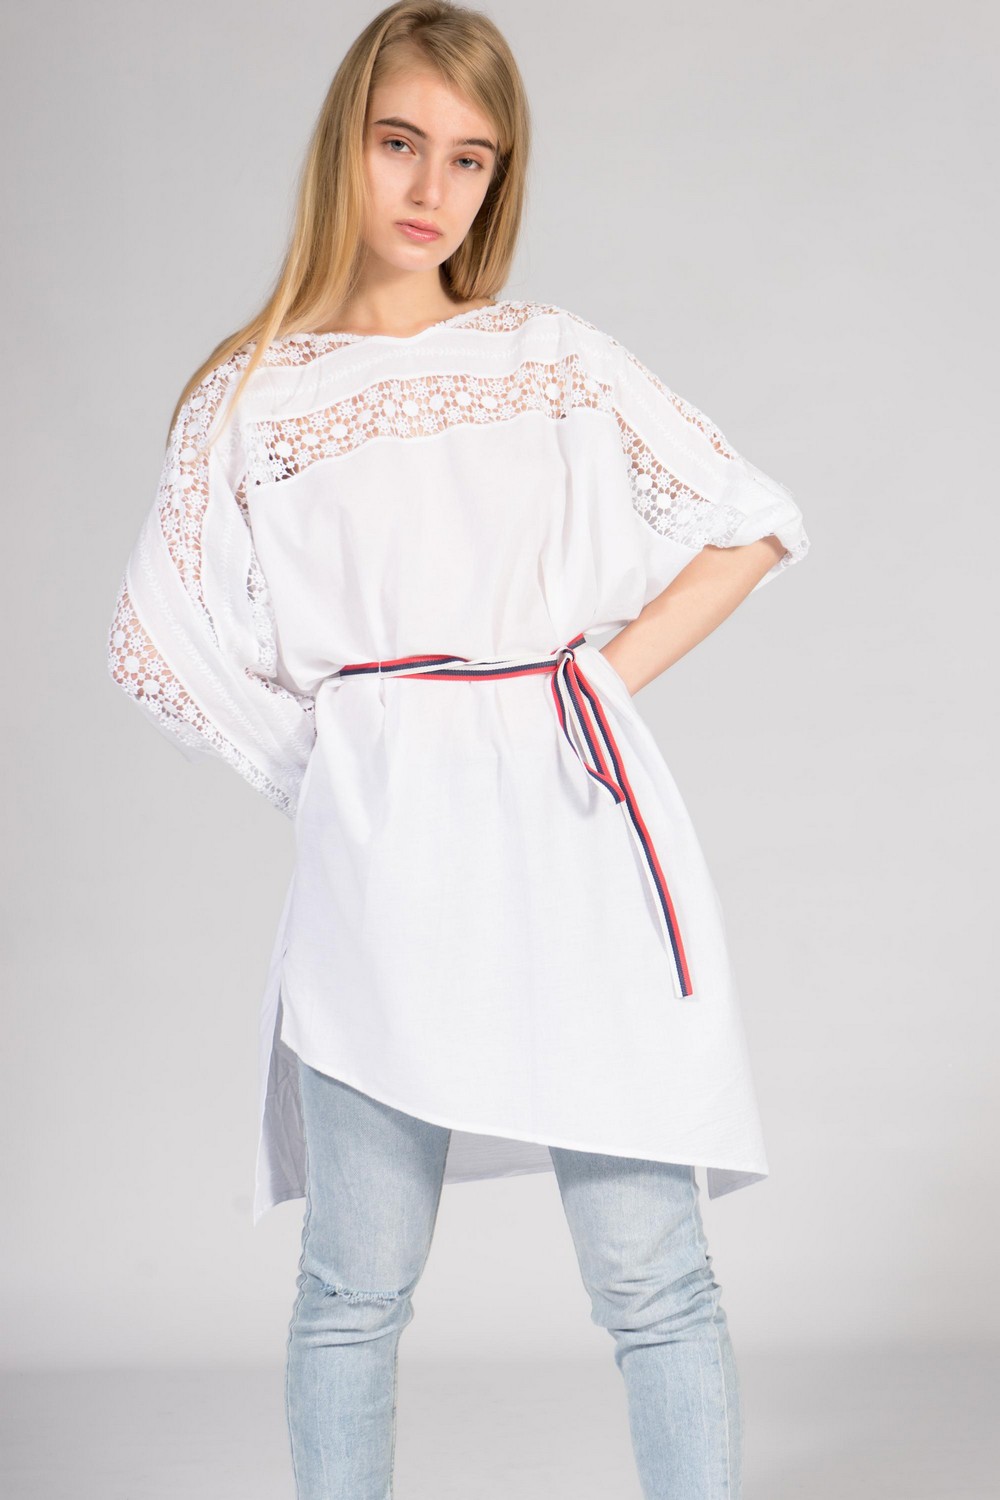 Buy Summer cotton loose lace asymmetric white long sleeve dress, Сomfortable casual ladies dress